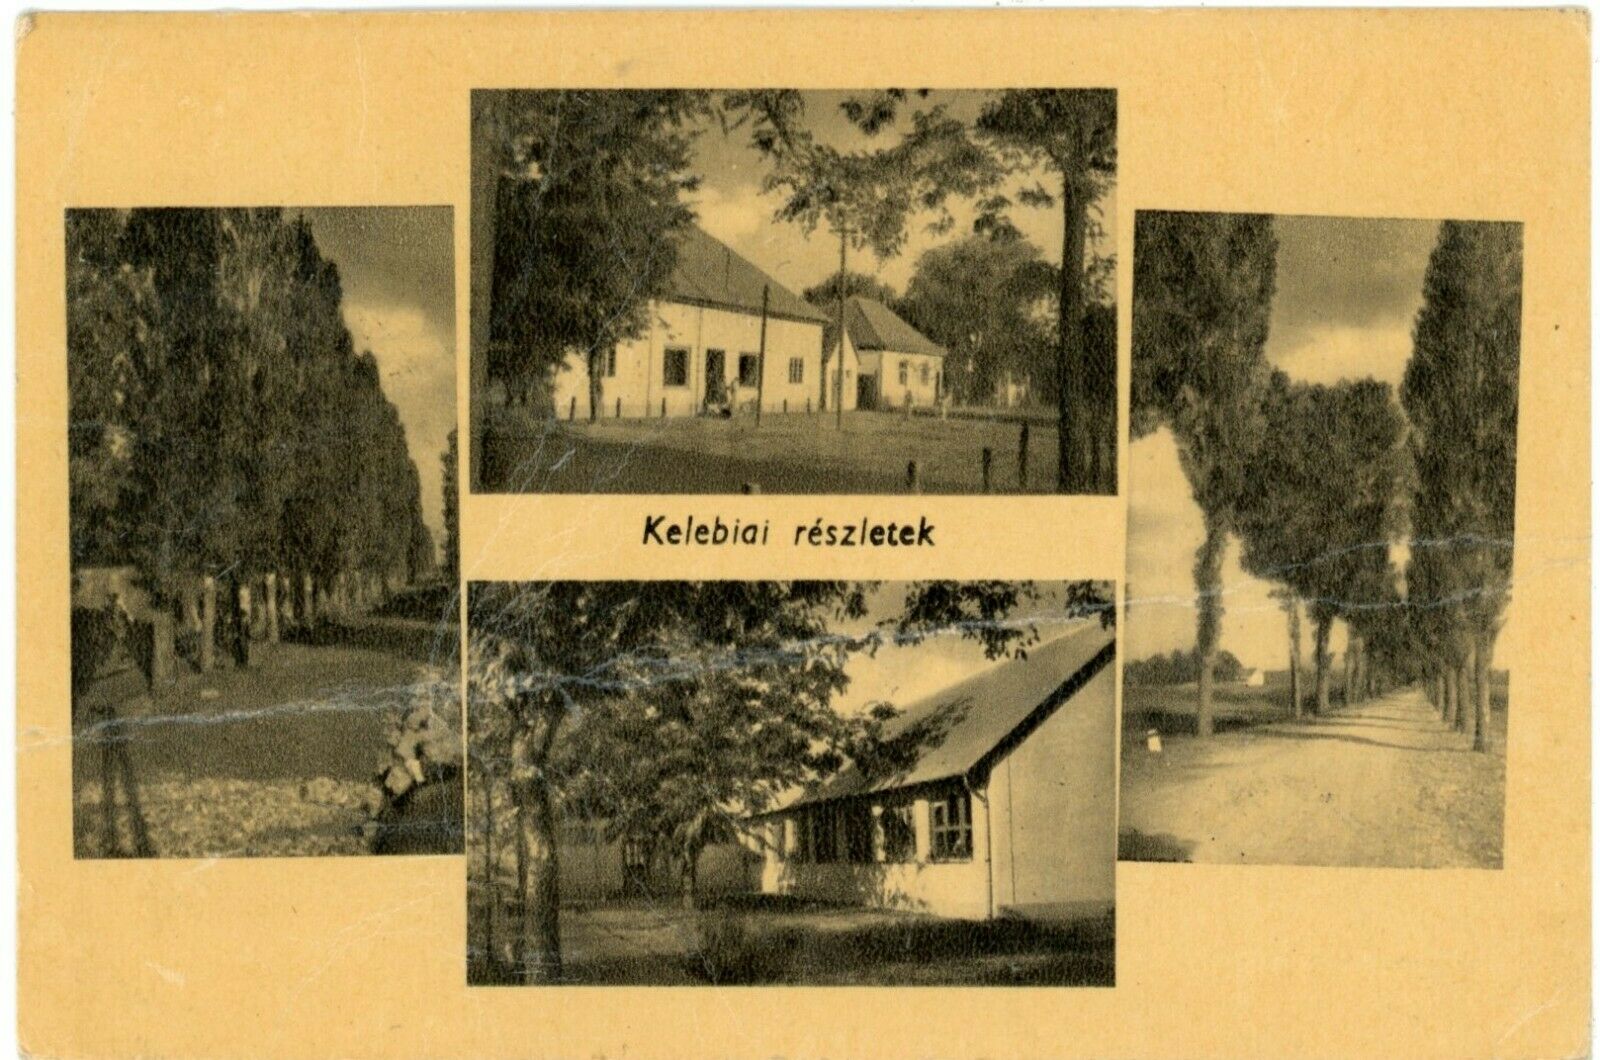 Pine Trees Roads And Bungalow Houses, Details Of Budapest, Hungary Postcard